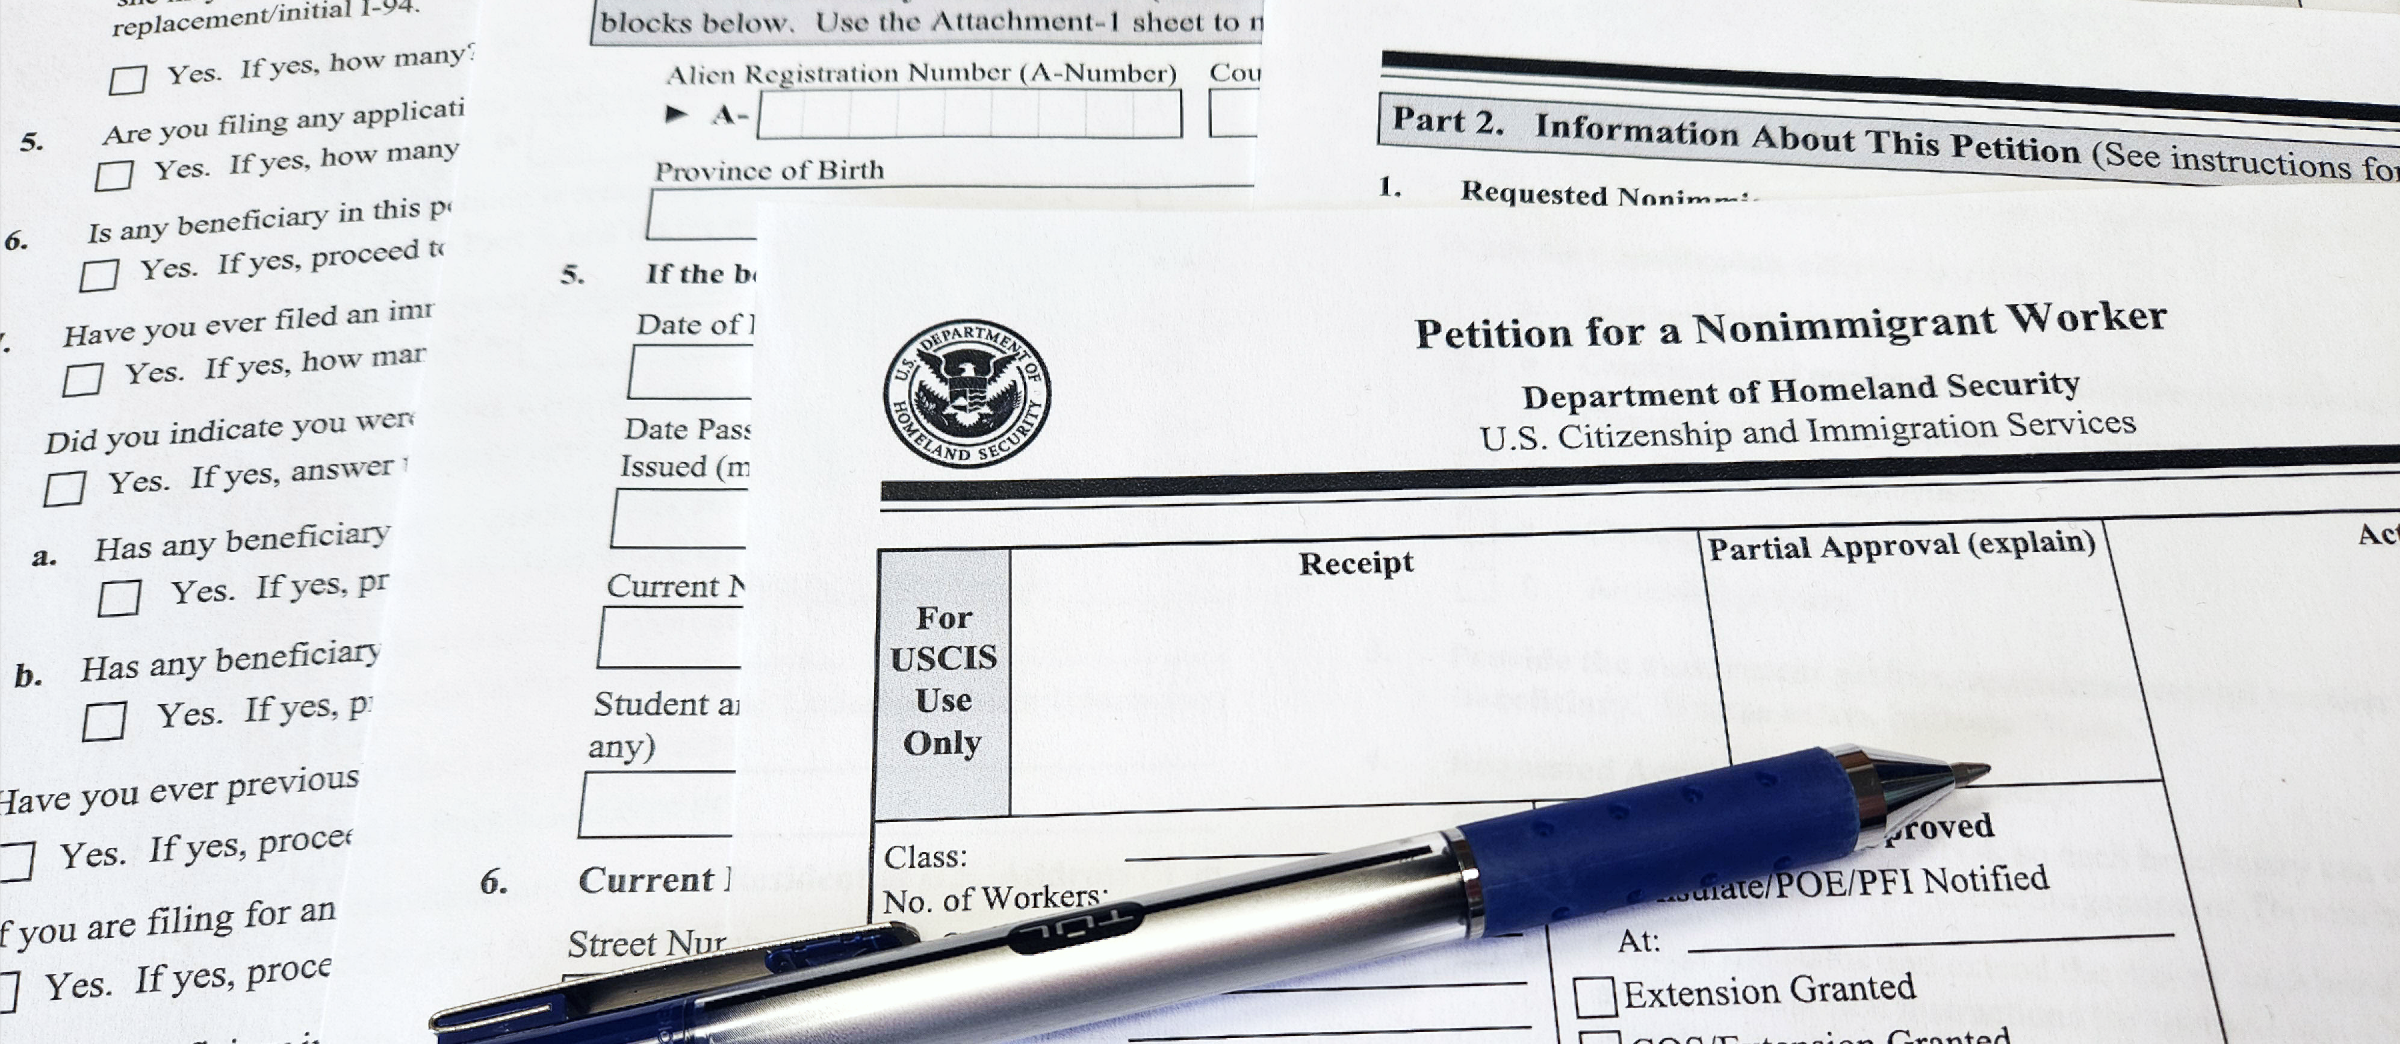 U.S. Citizenship and Immigration Services form I-129 Petition for a Nonimmigrant Worker